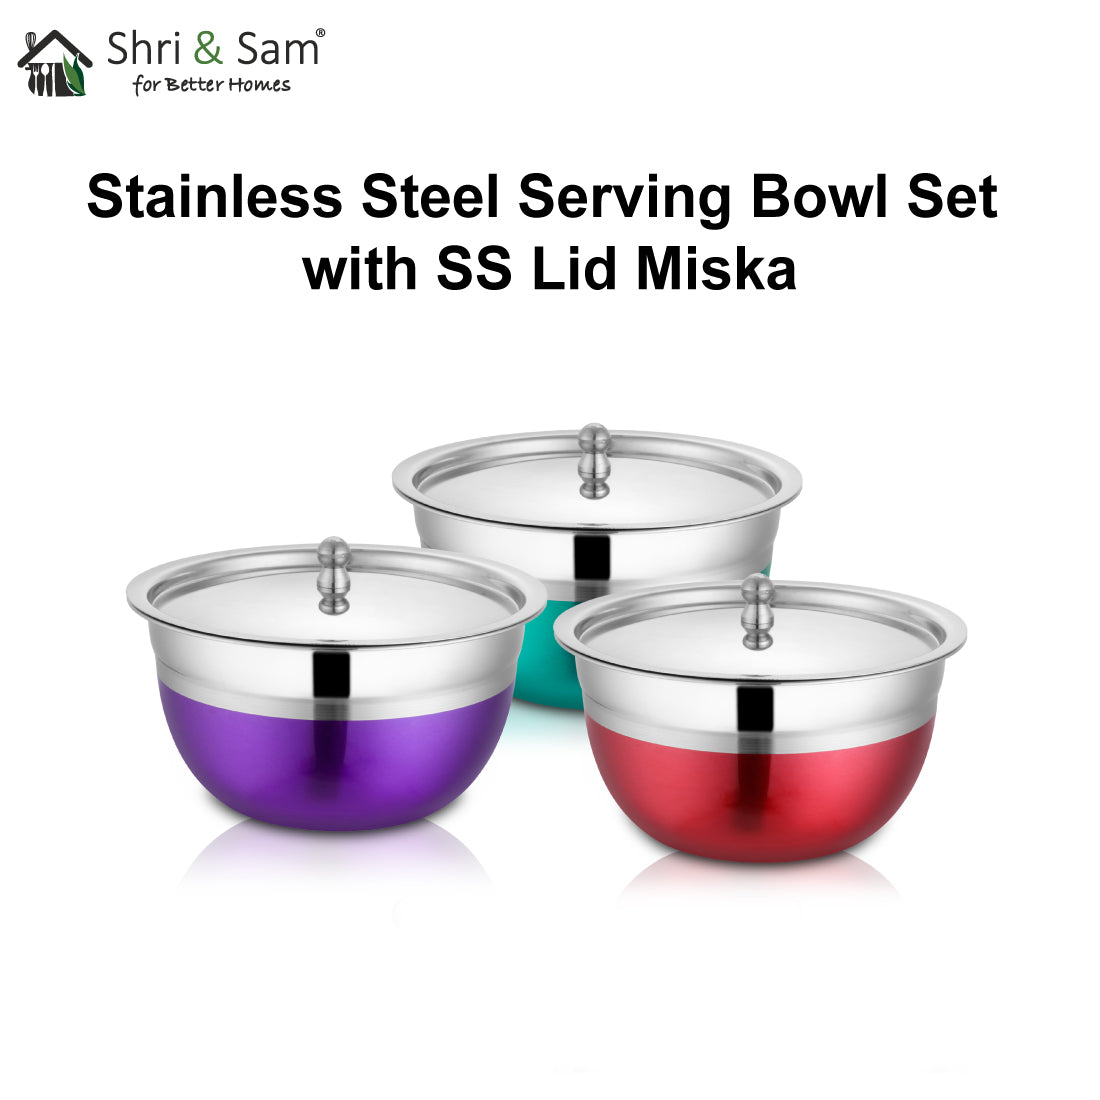 Stainless Steel Serving Bowl Set with SS Lid Miska